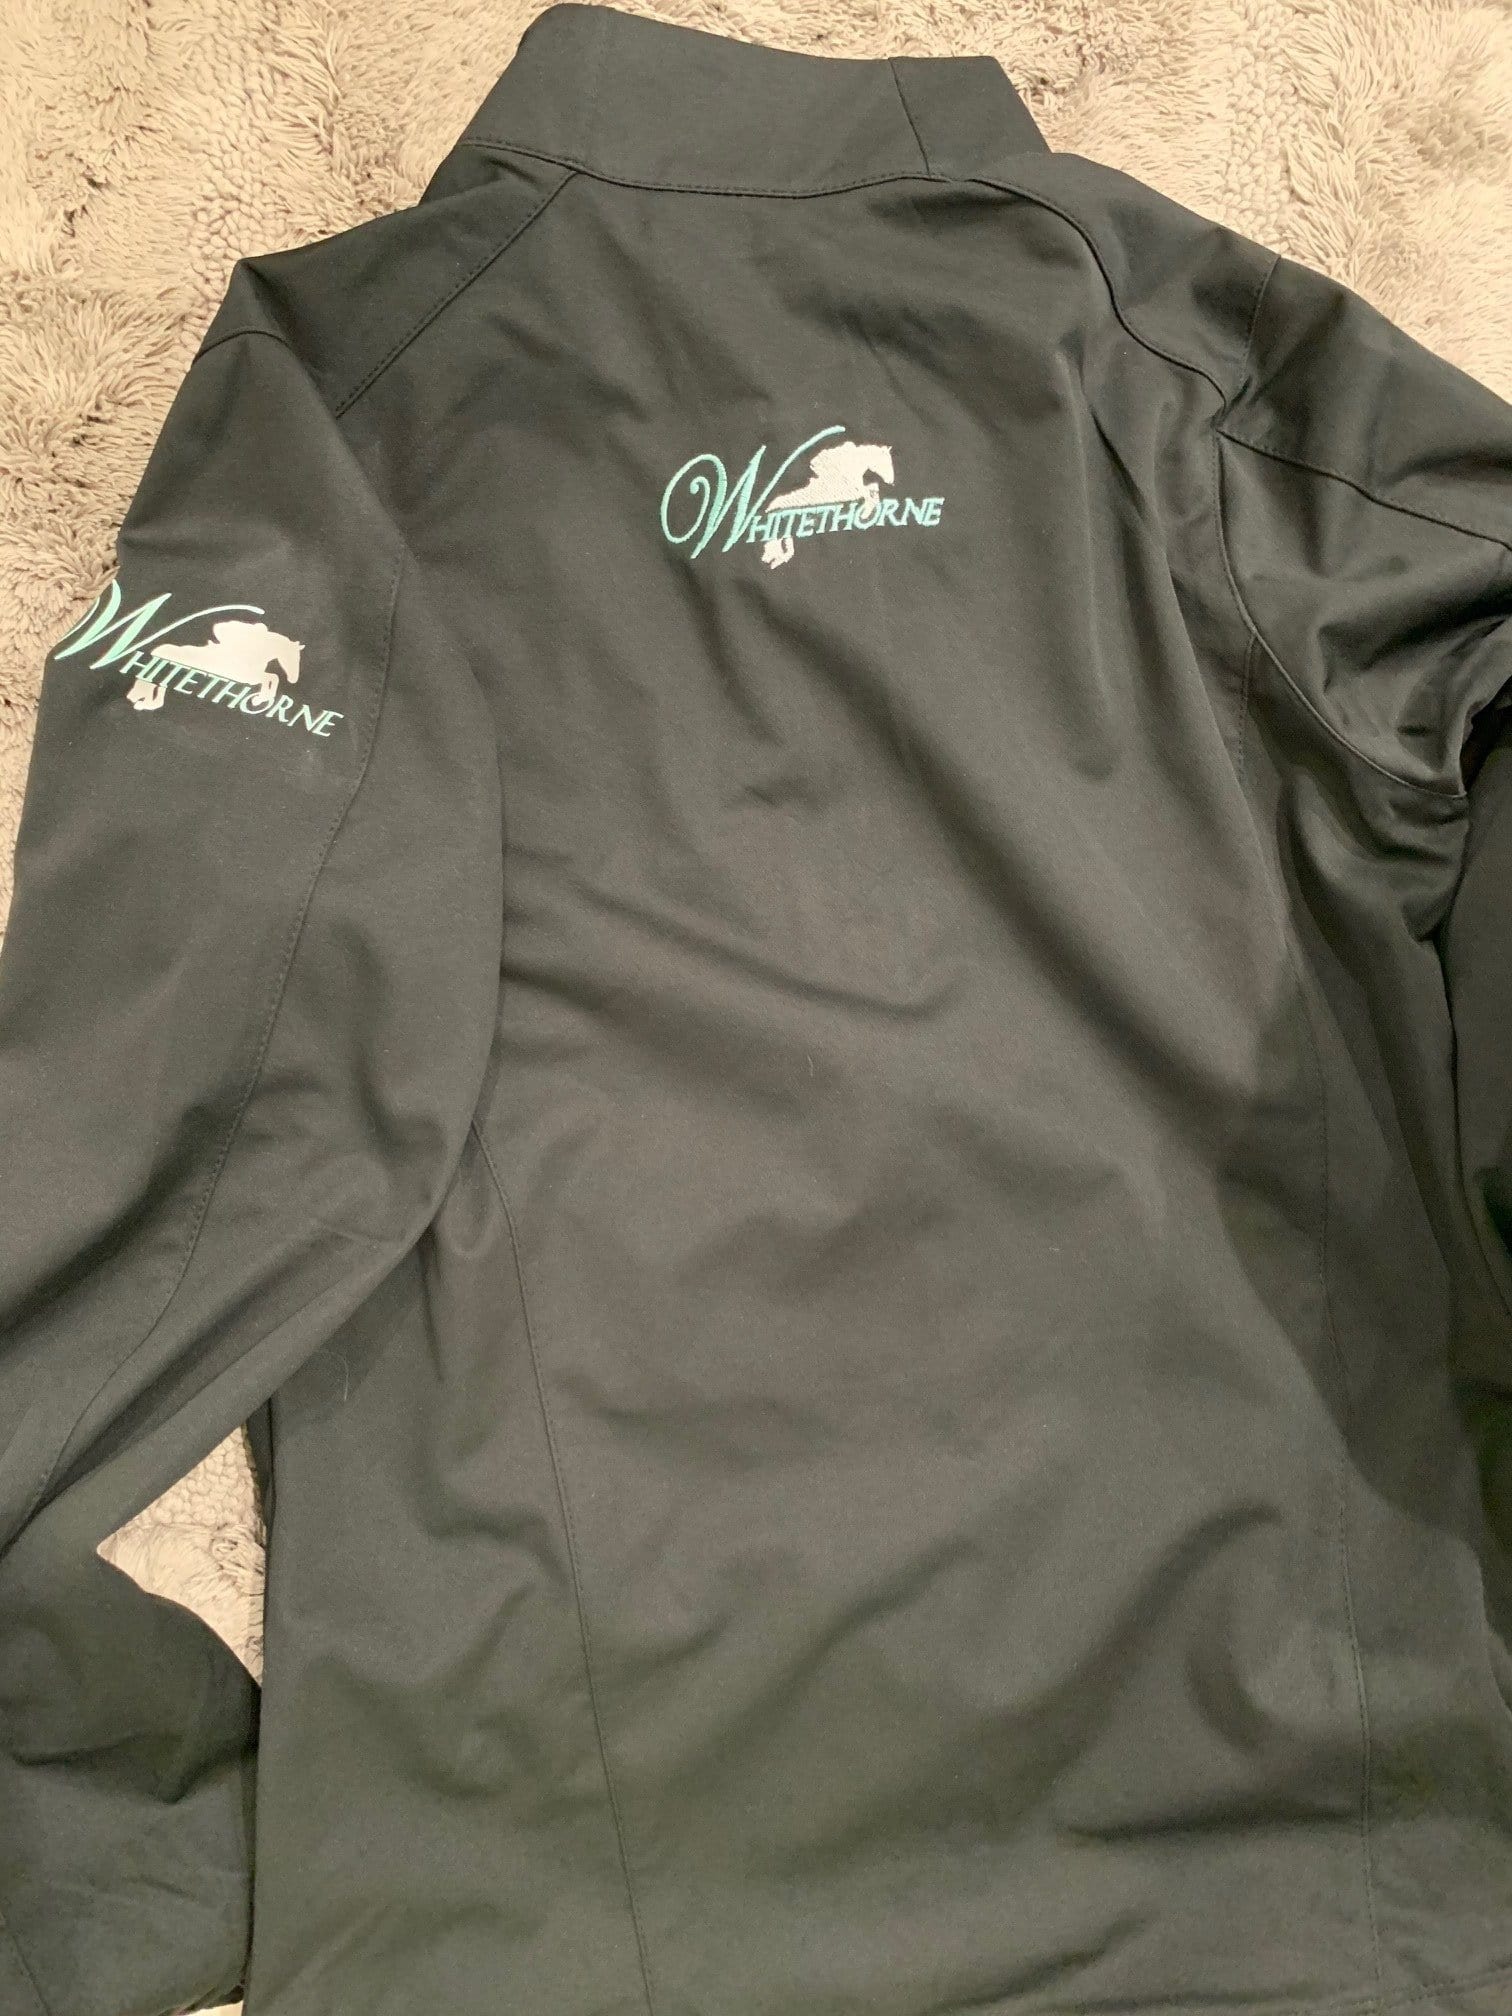 Equestrian Team Apparel Custom Jacket Whitehorne Jacket equestrian team apparel online tack store mobile tack store custom farm apparel custom show stable clothing equestrian lifestyle horse show clothing riding clothes horses equestrian tack store